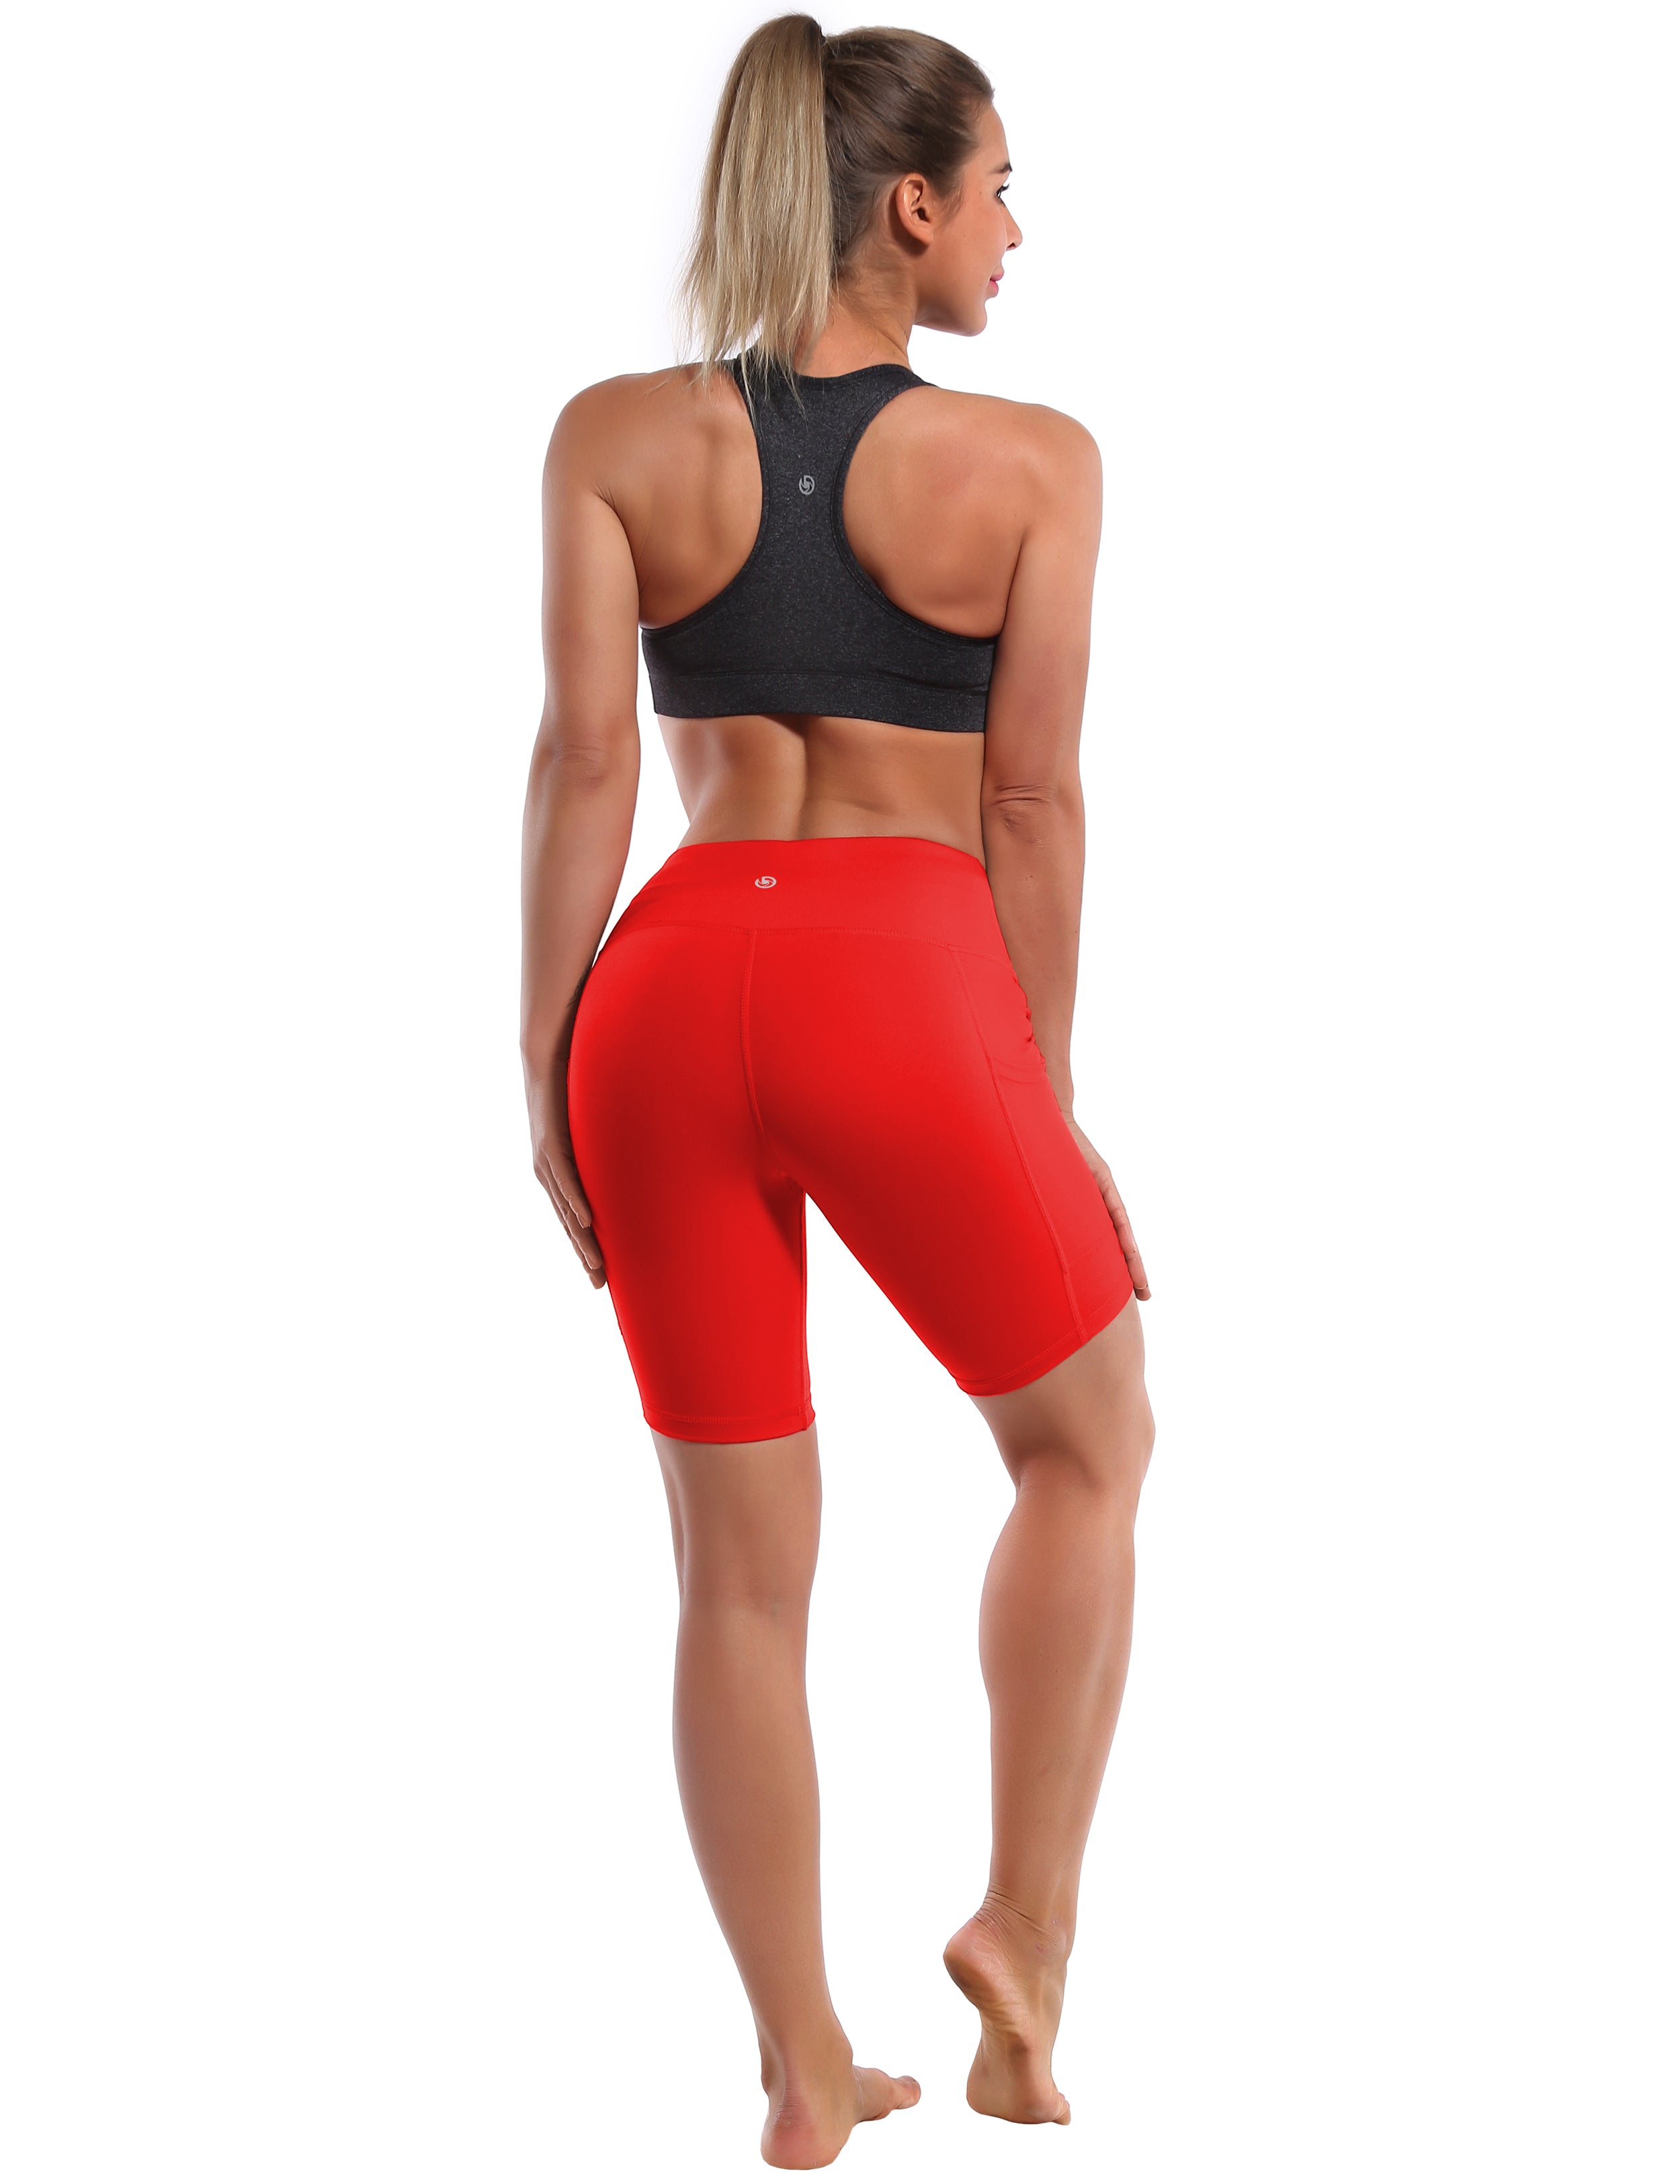 8" Side Pockets Yoga Shorts scarlet Sleek, soft, smooth and totally comfortable: our newest style is here. Softest-ever fabric High elasticity High density 4-way stretch Fabric doesn't attract lint easily No see-through Moisture-wicking Machine wash 75% Nylon, 25% Spandex